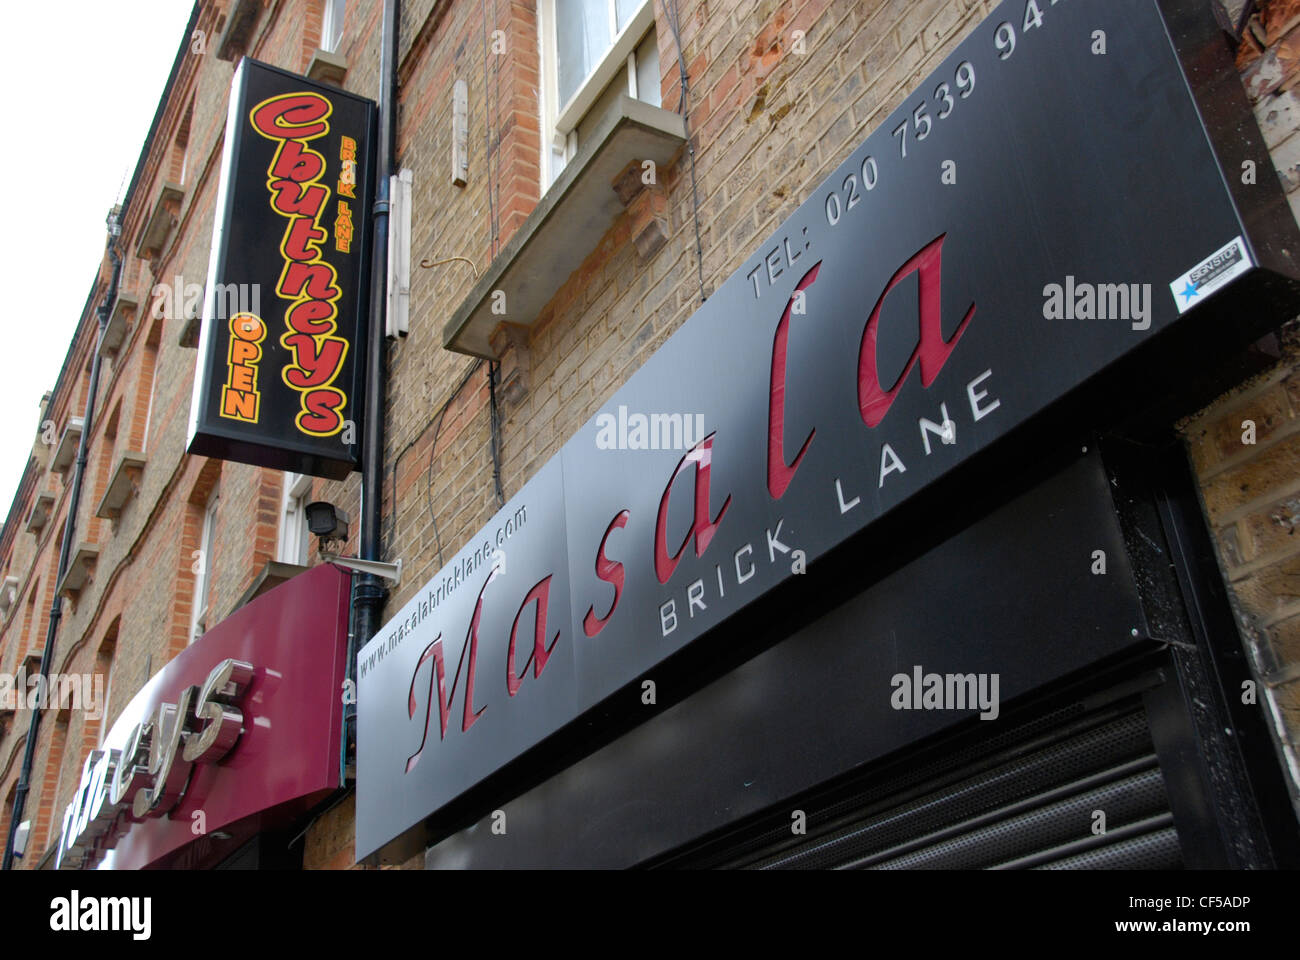 The front of the Masala Indian restaurant in Brick Lane. Stock Photo